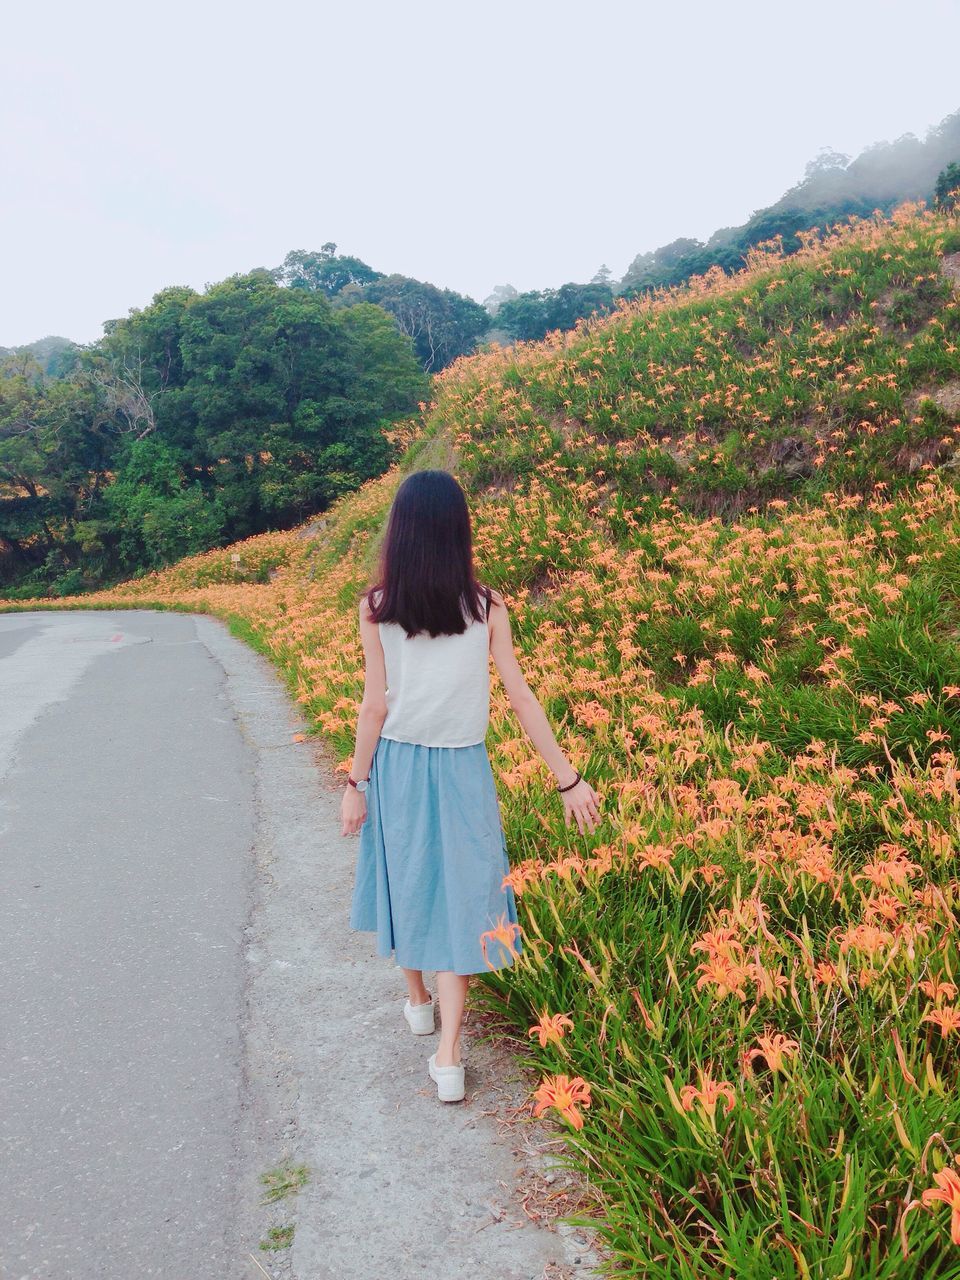 real people, one person, full length, rear view, casual clothing, standing, plant, mountain, tree, leisure activity, day, walking, nature, growth, outdoors, lifestyles, long hair, young women, young adult, clear sky, scenics, beauty in nature, sky